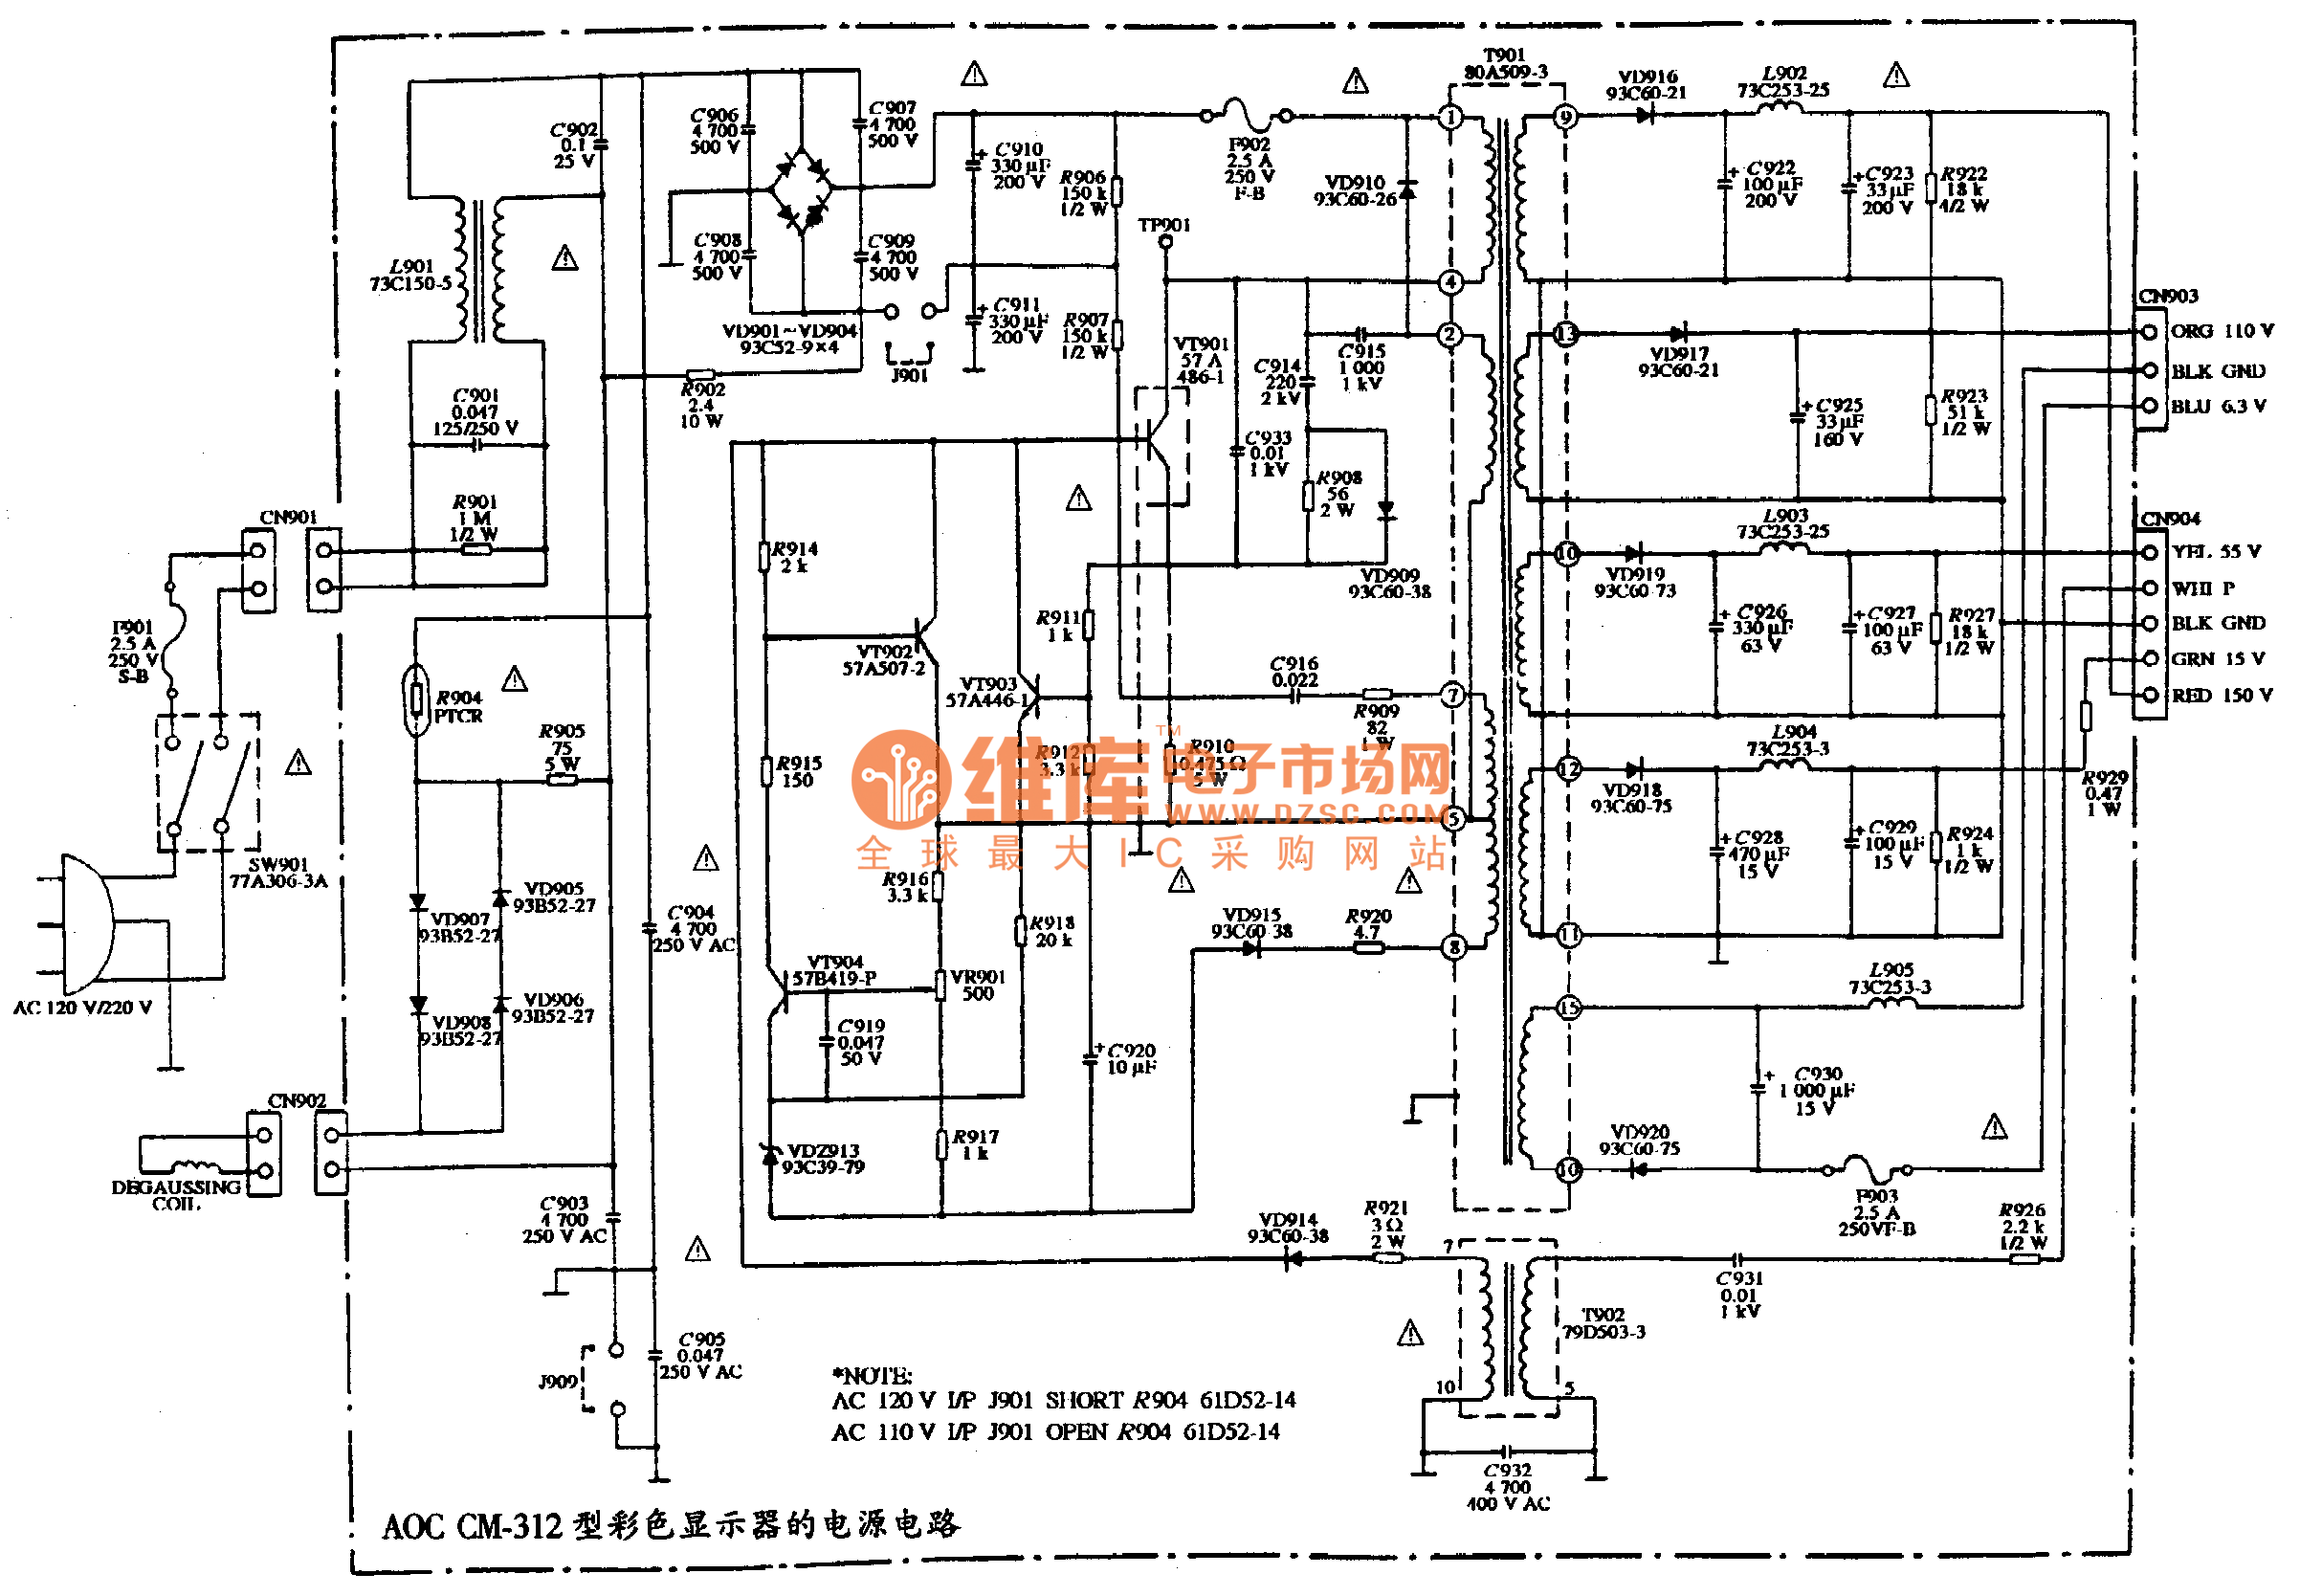 The power supply circuit diagram of AOC CM-312 color display - power